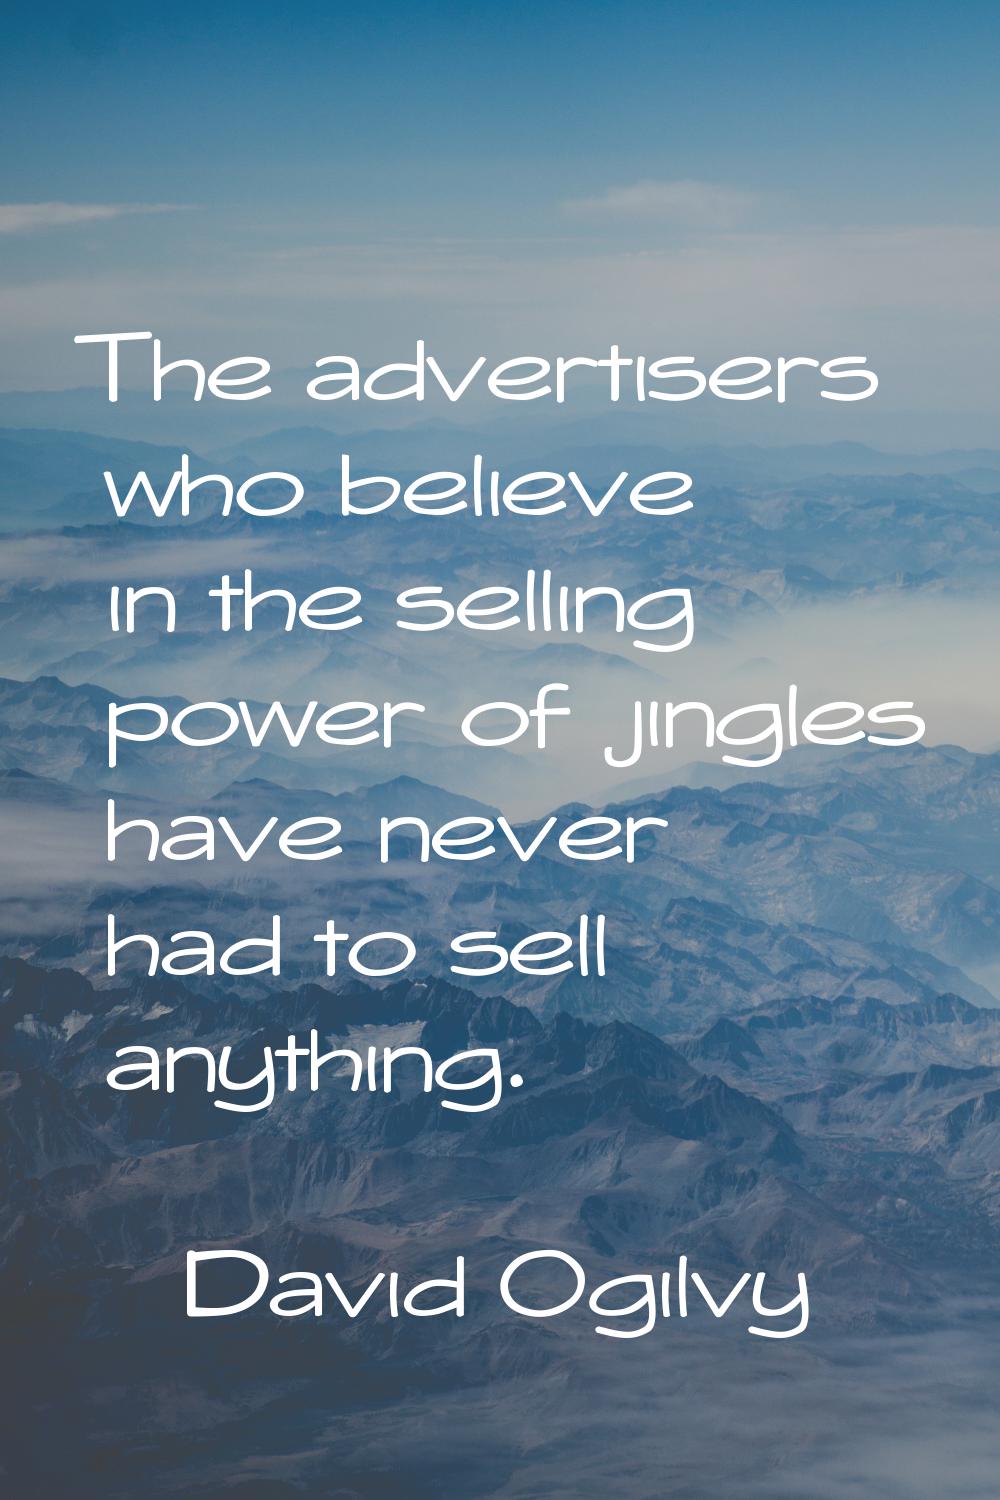 The advertisers who believe in the selling power of jingles have never had to sell anything.